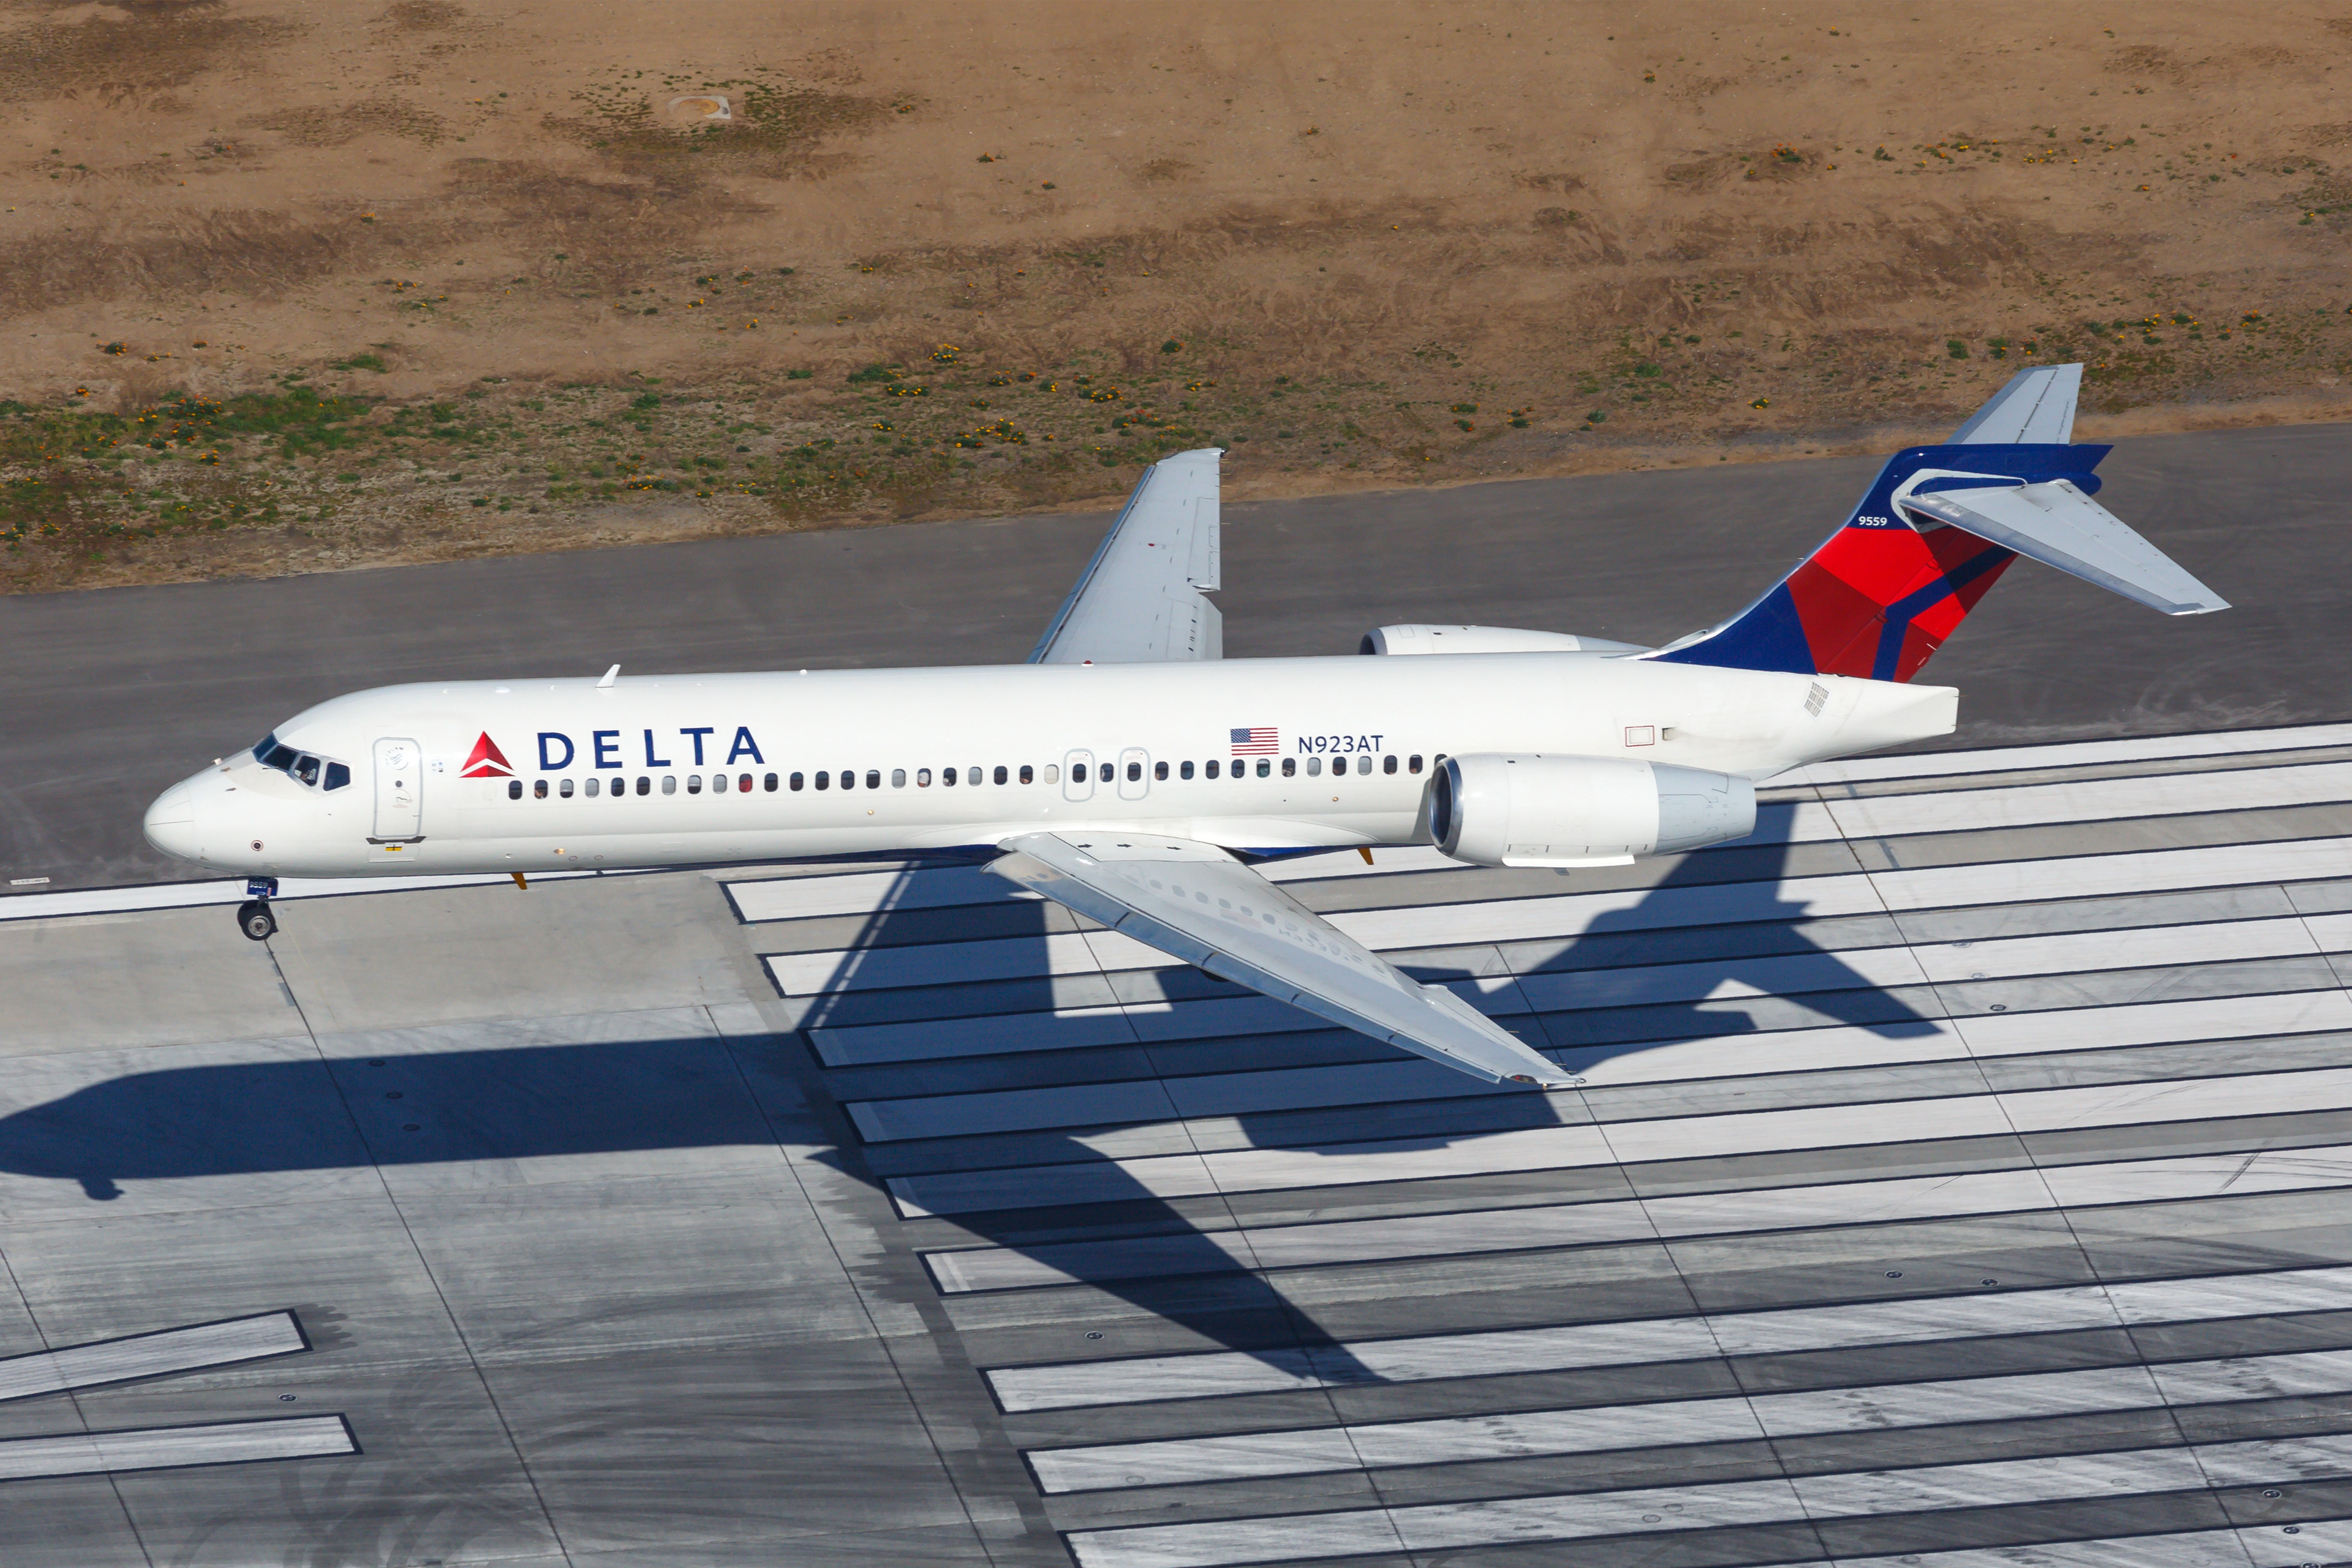 A Delta Air Lines Boeing 717 about to land on a runway.